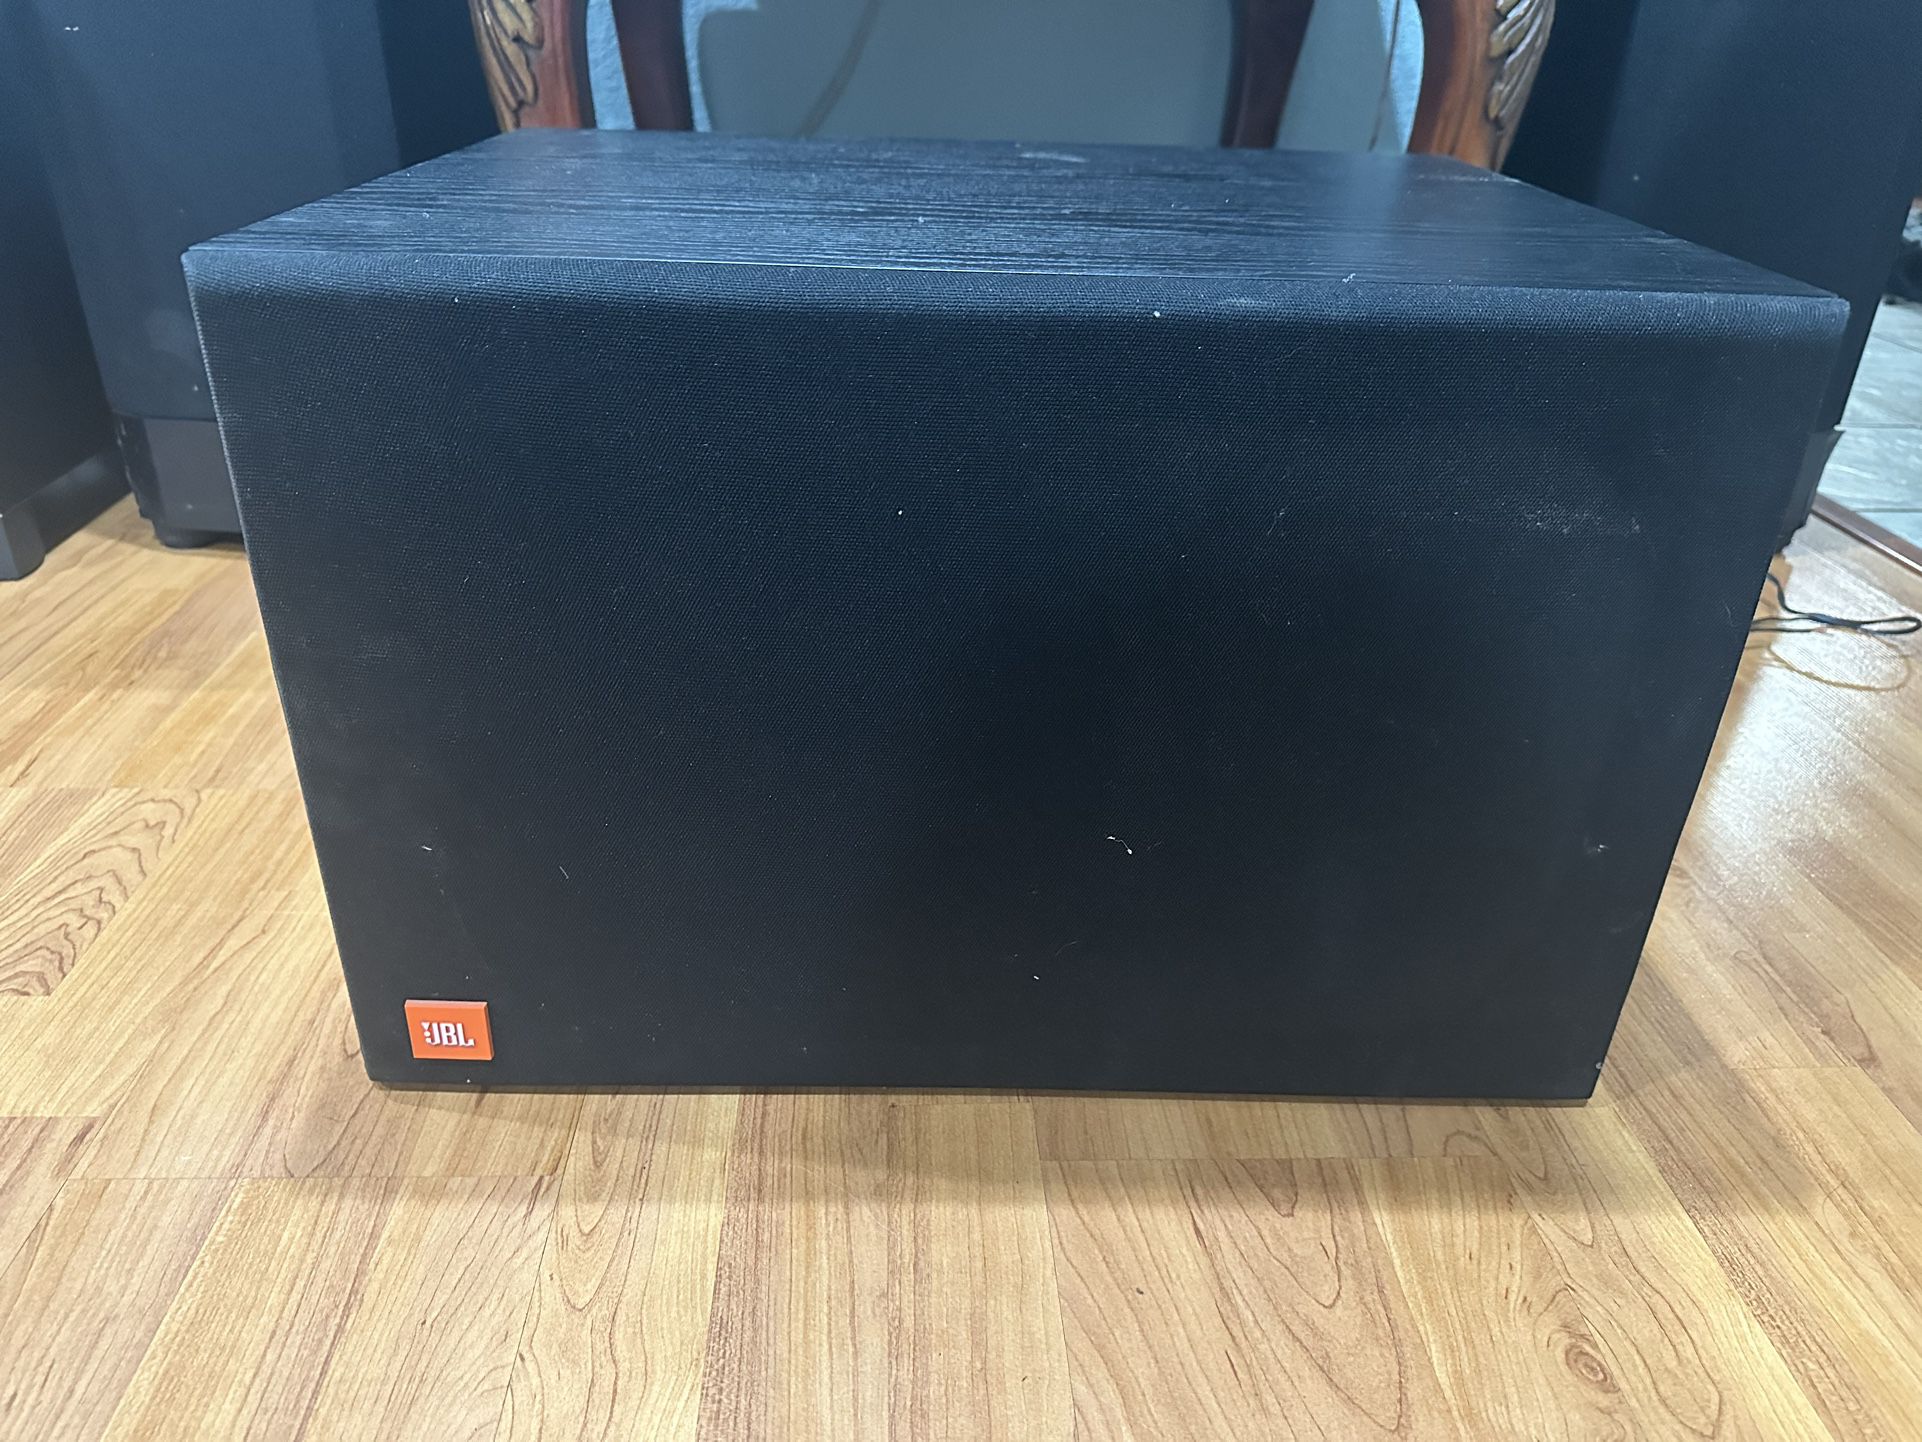 JBL PSW-1200 12" Powered Subwoofer. Made in Canada 🇨🇦 